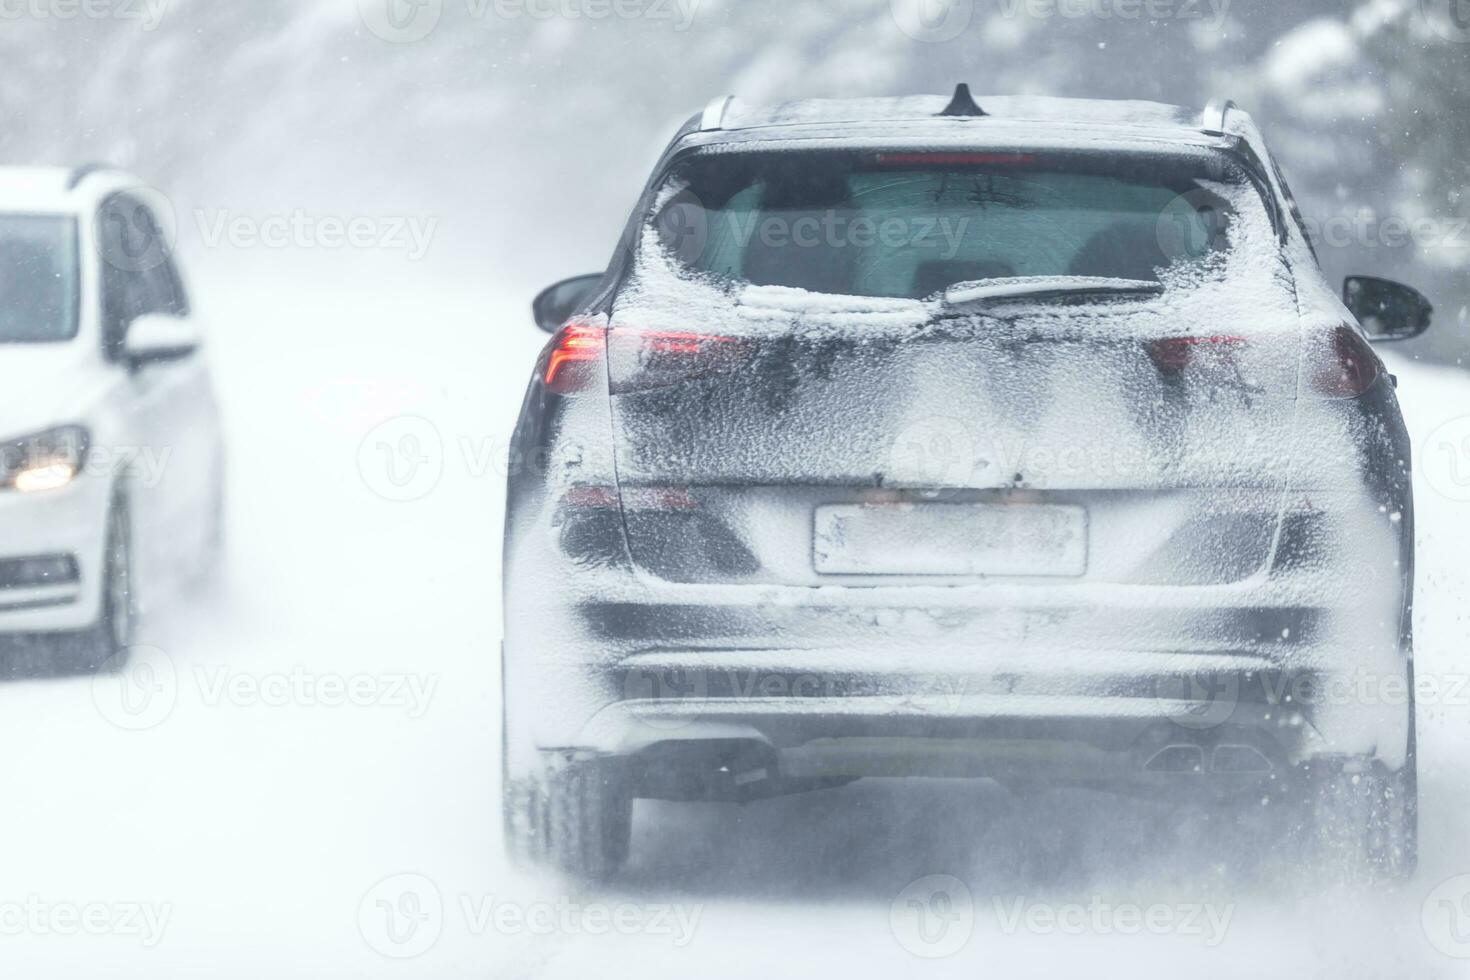 SUV car driving on snowy slippery road inside the forest, having registration number insivisible due to snow photo